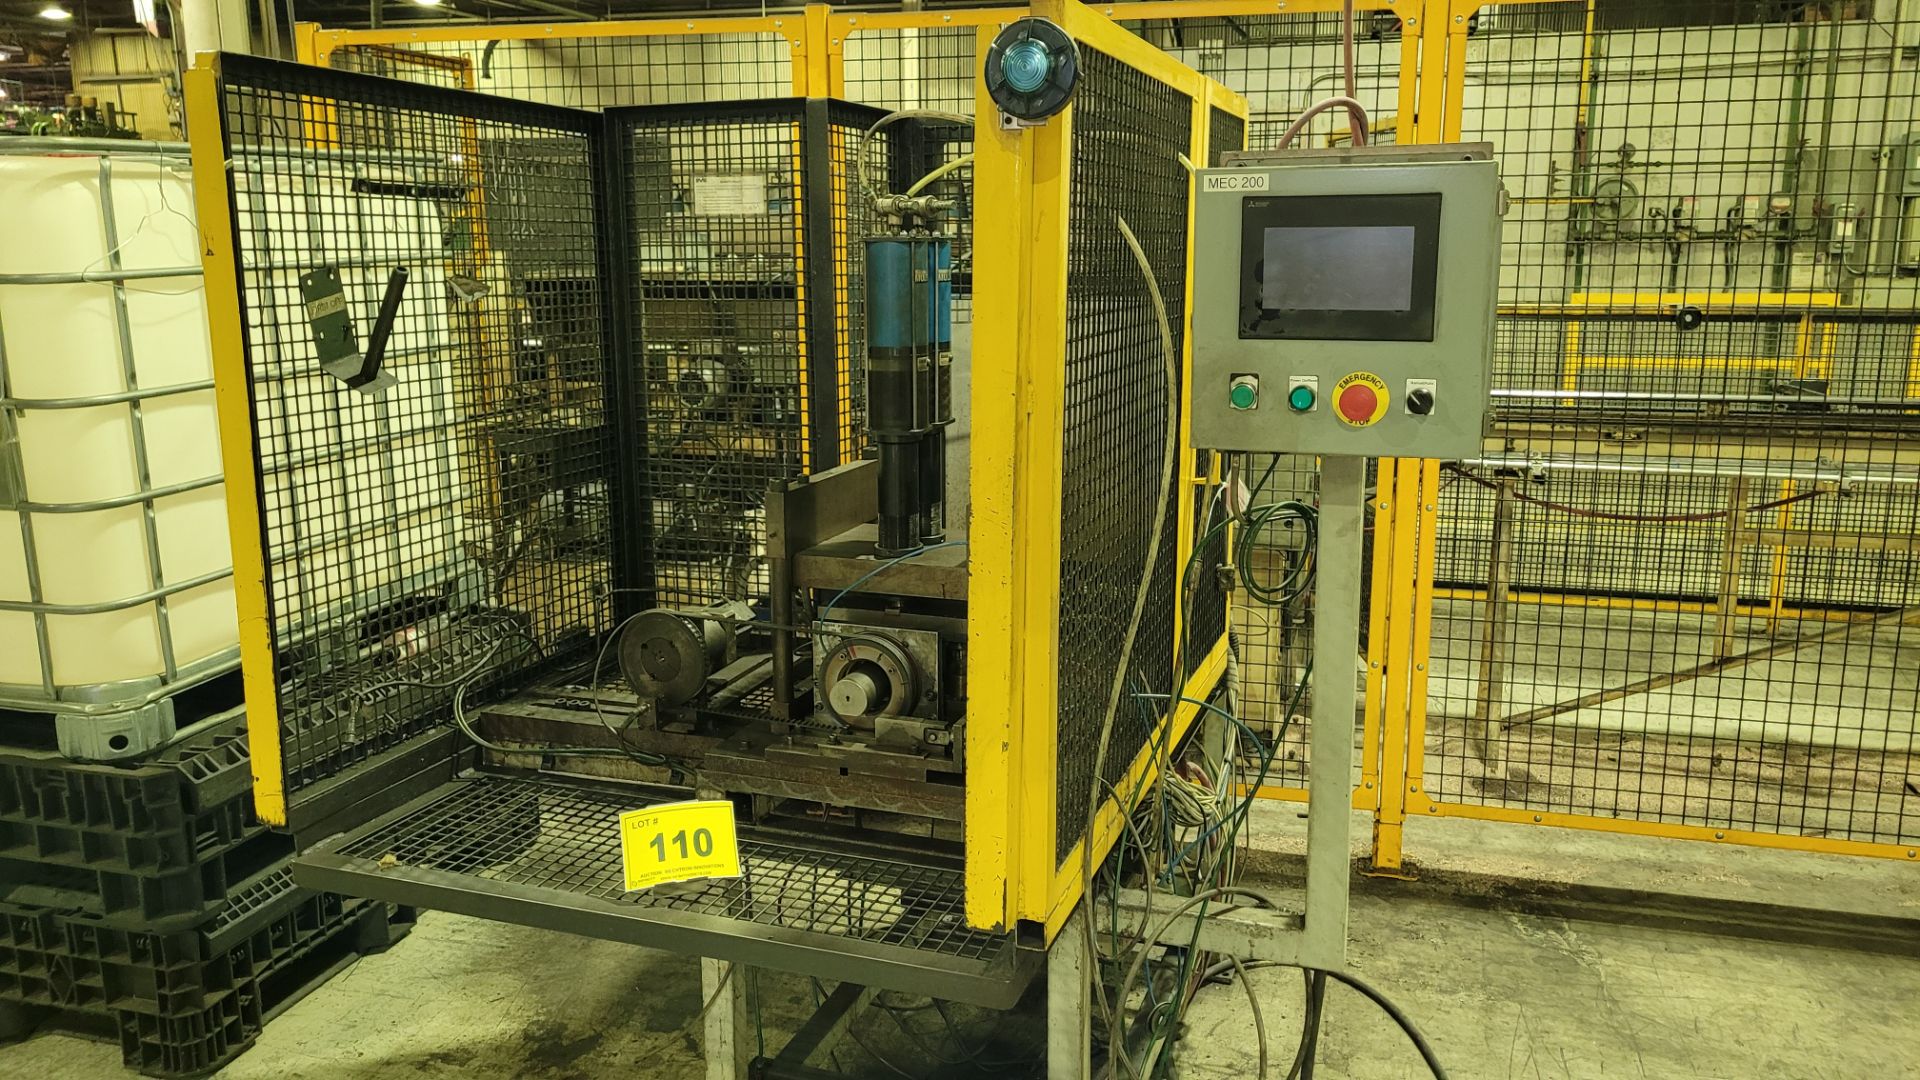 PNEUMATIC DIMPLER PRESS, MITSUBISHI CONTROLLER, SAFETY CAGE